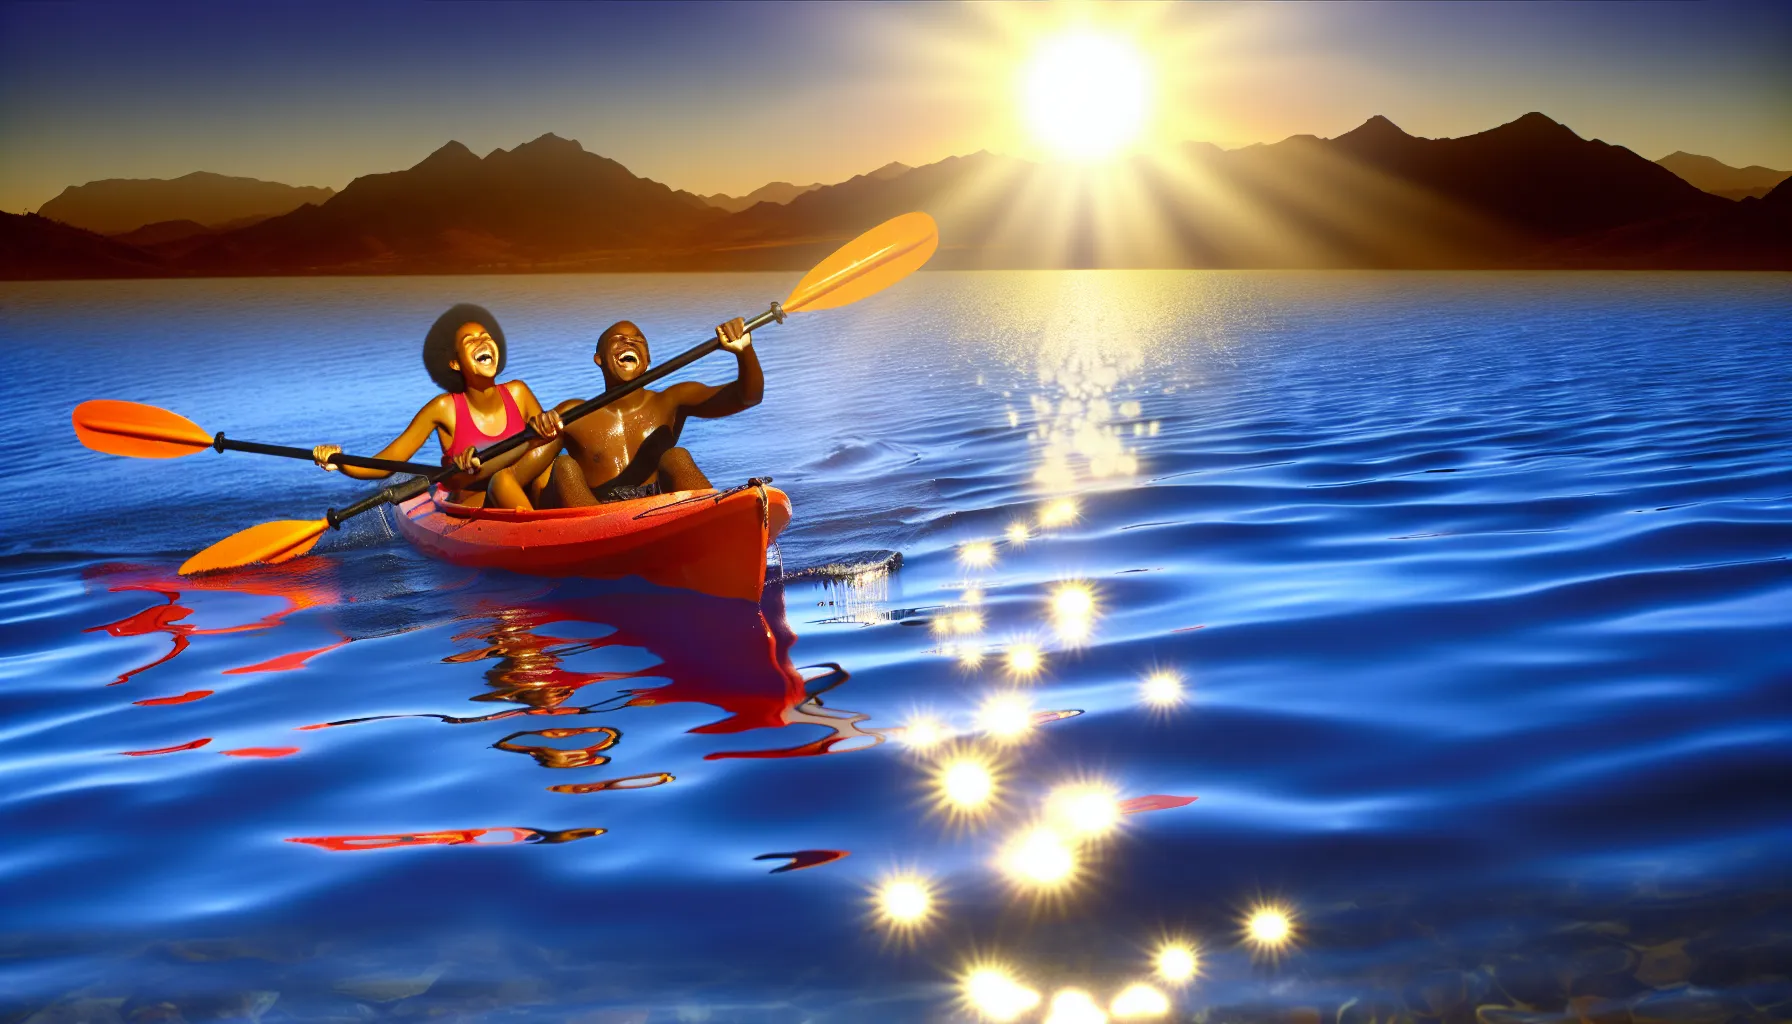 In a symphony of splashes and sunset glows, a couple finds unity in the rhythm of the paddles—a <strong>moment of pure connection</strong> amplified by the playful spirit of the water. Discover the ripple effect of joy on a water-bound adventure at <a href='https://datingserviceusa.net/' target='_blank'>DatingServiceUSA</a>.